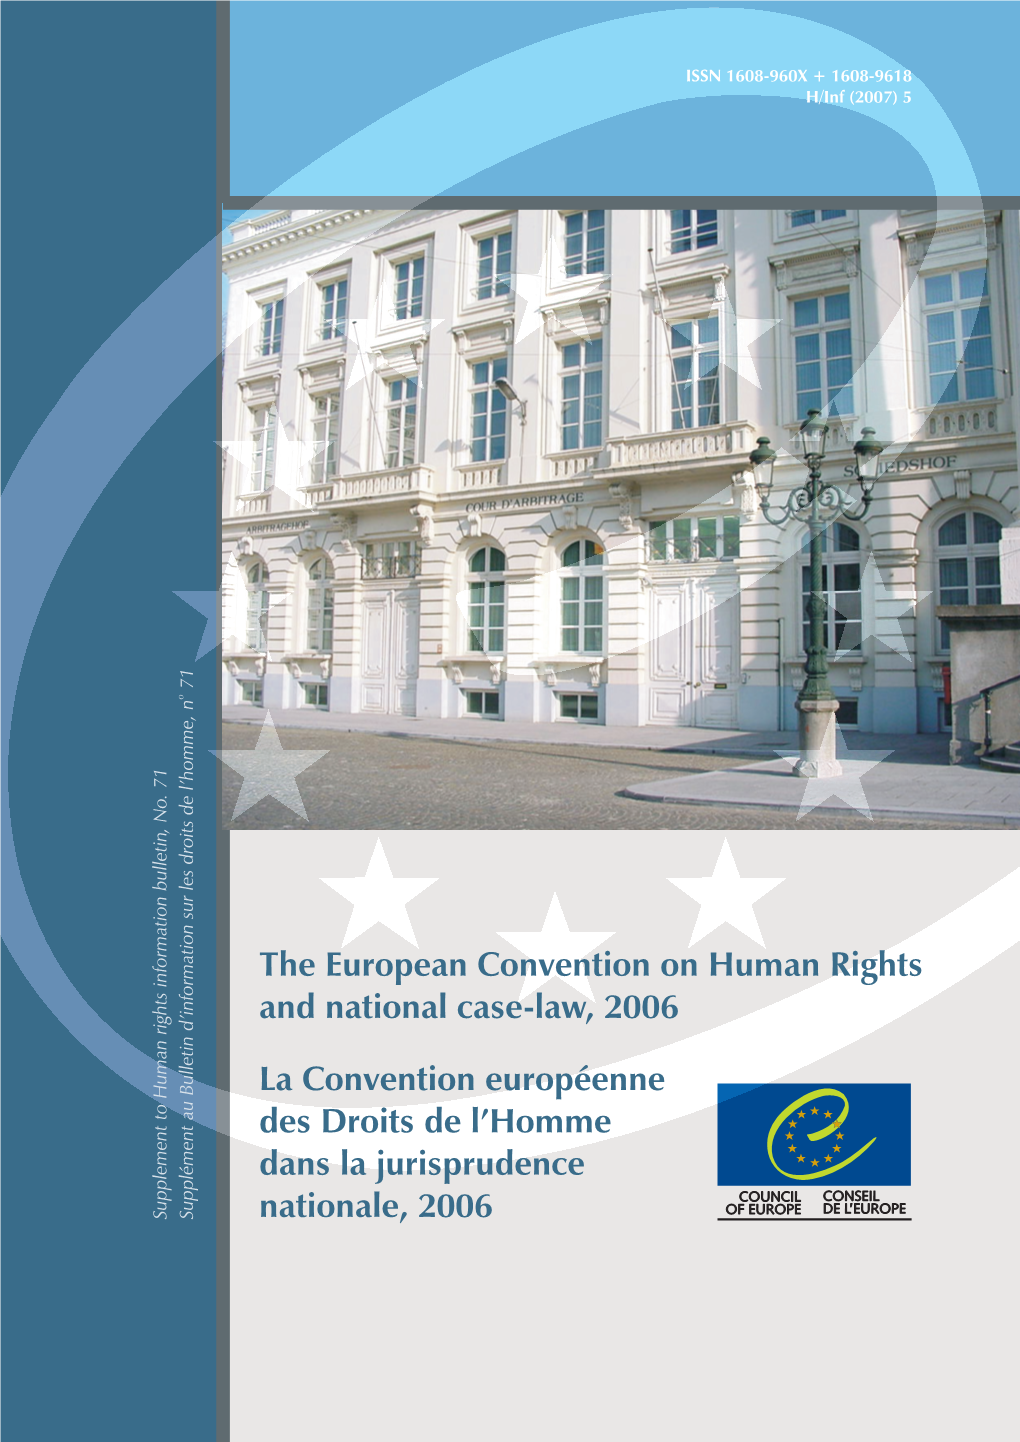 The European Convention on Human Rights and National Case-Law, 2006